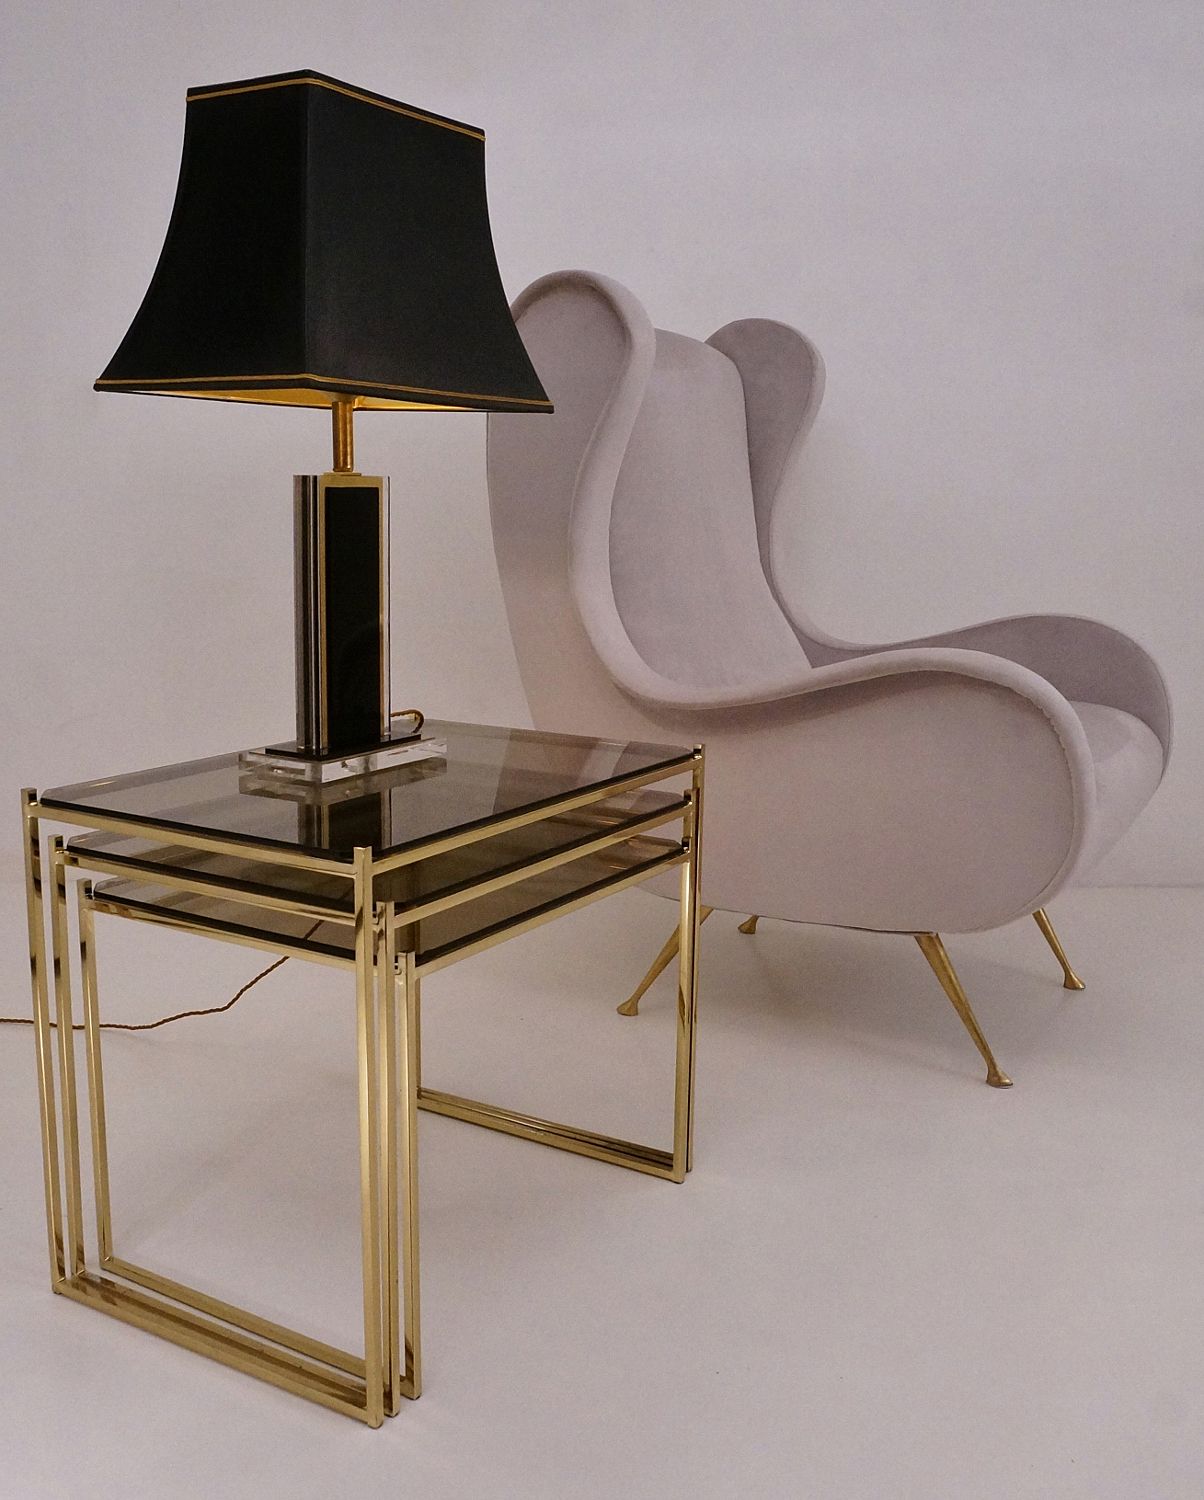 Milo Baughman Nesting Tables, Gold Plated & Smoked Glass Pertaining To Most Recently Released Antique Gold Nesting Console Tables (View 3 of 10)